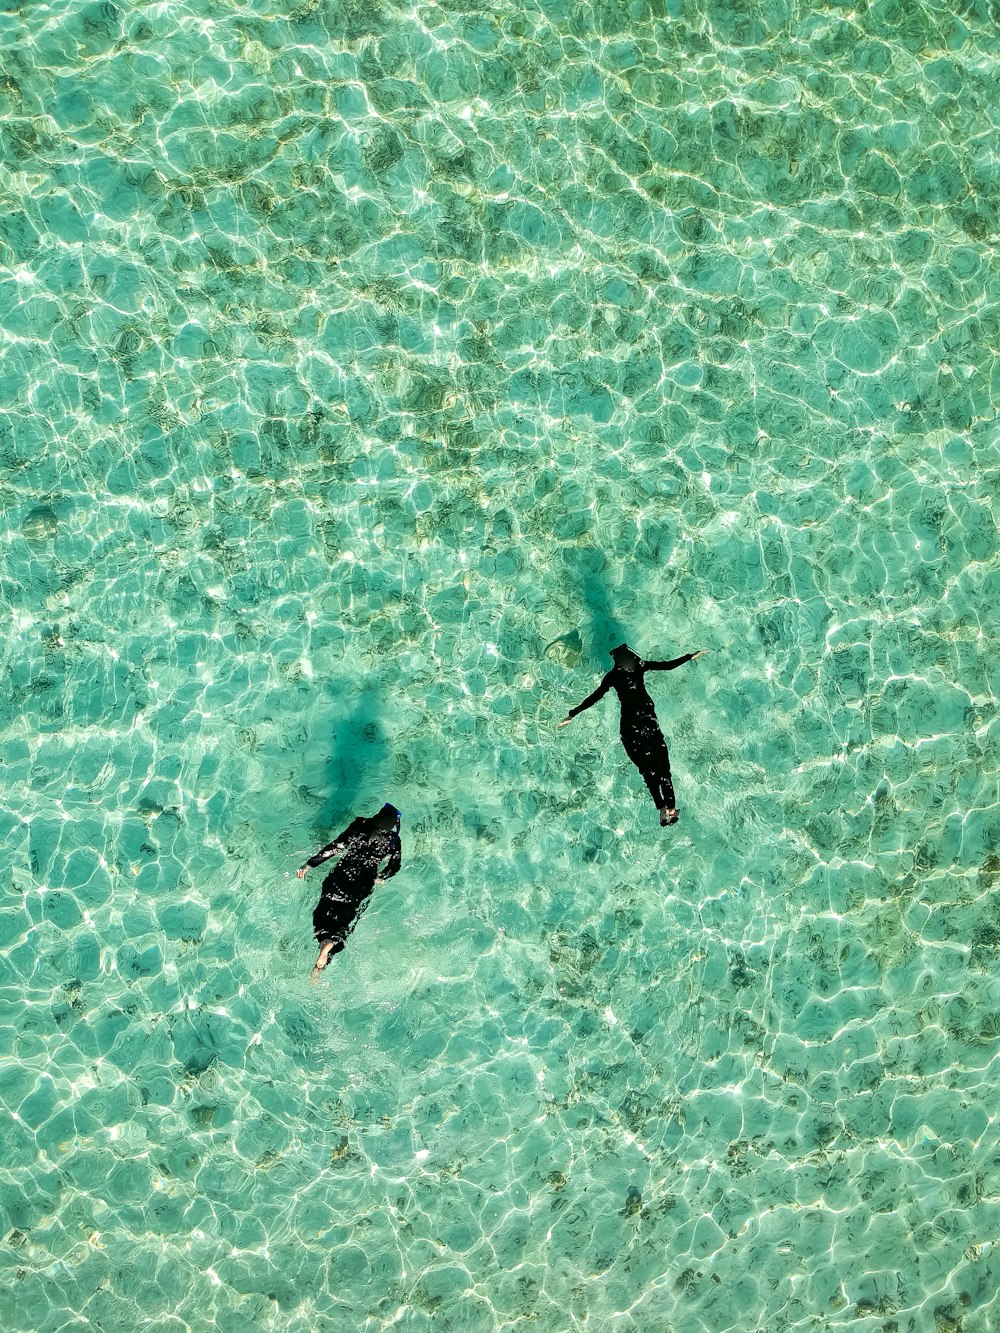 aerial photo of two human swimming on body of water